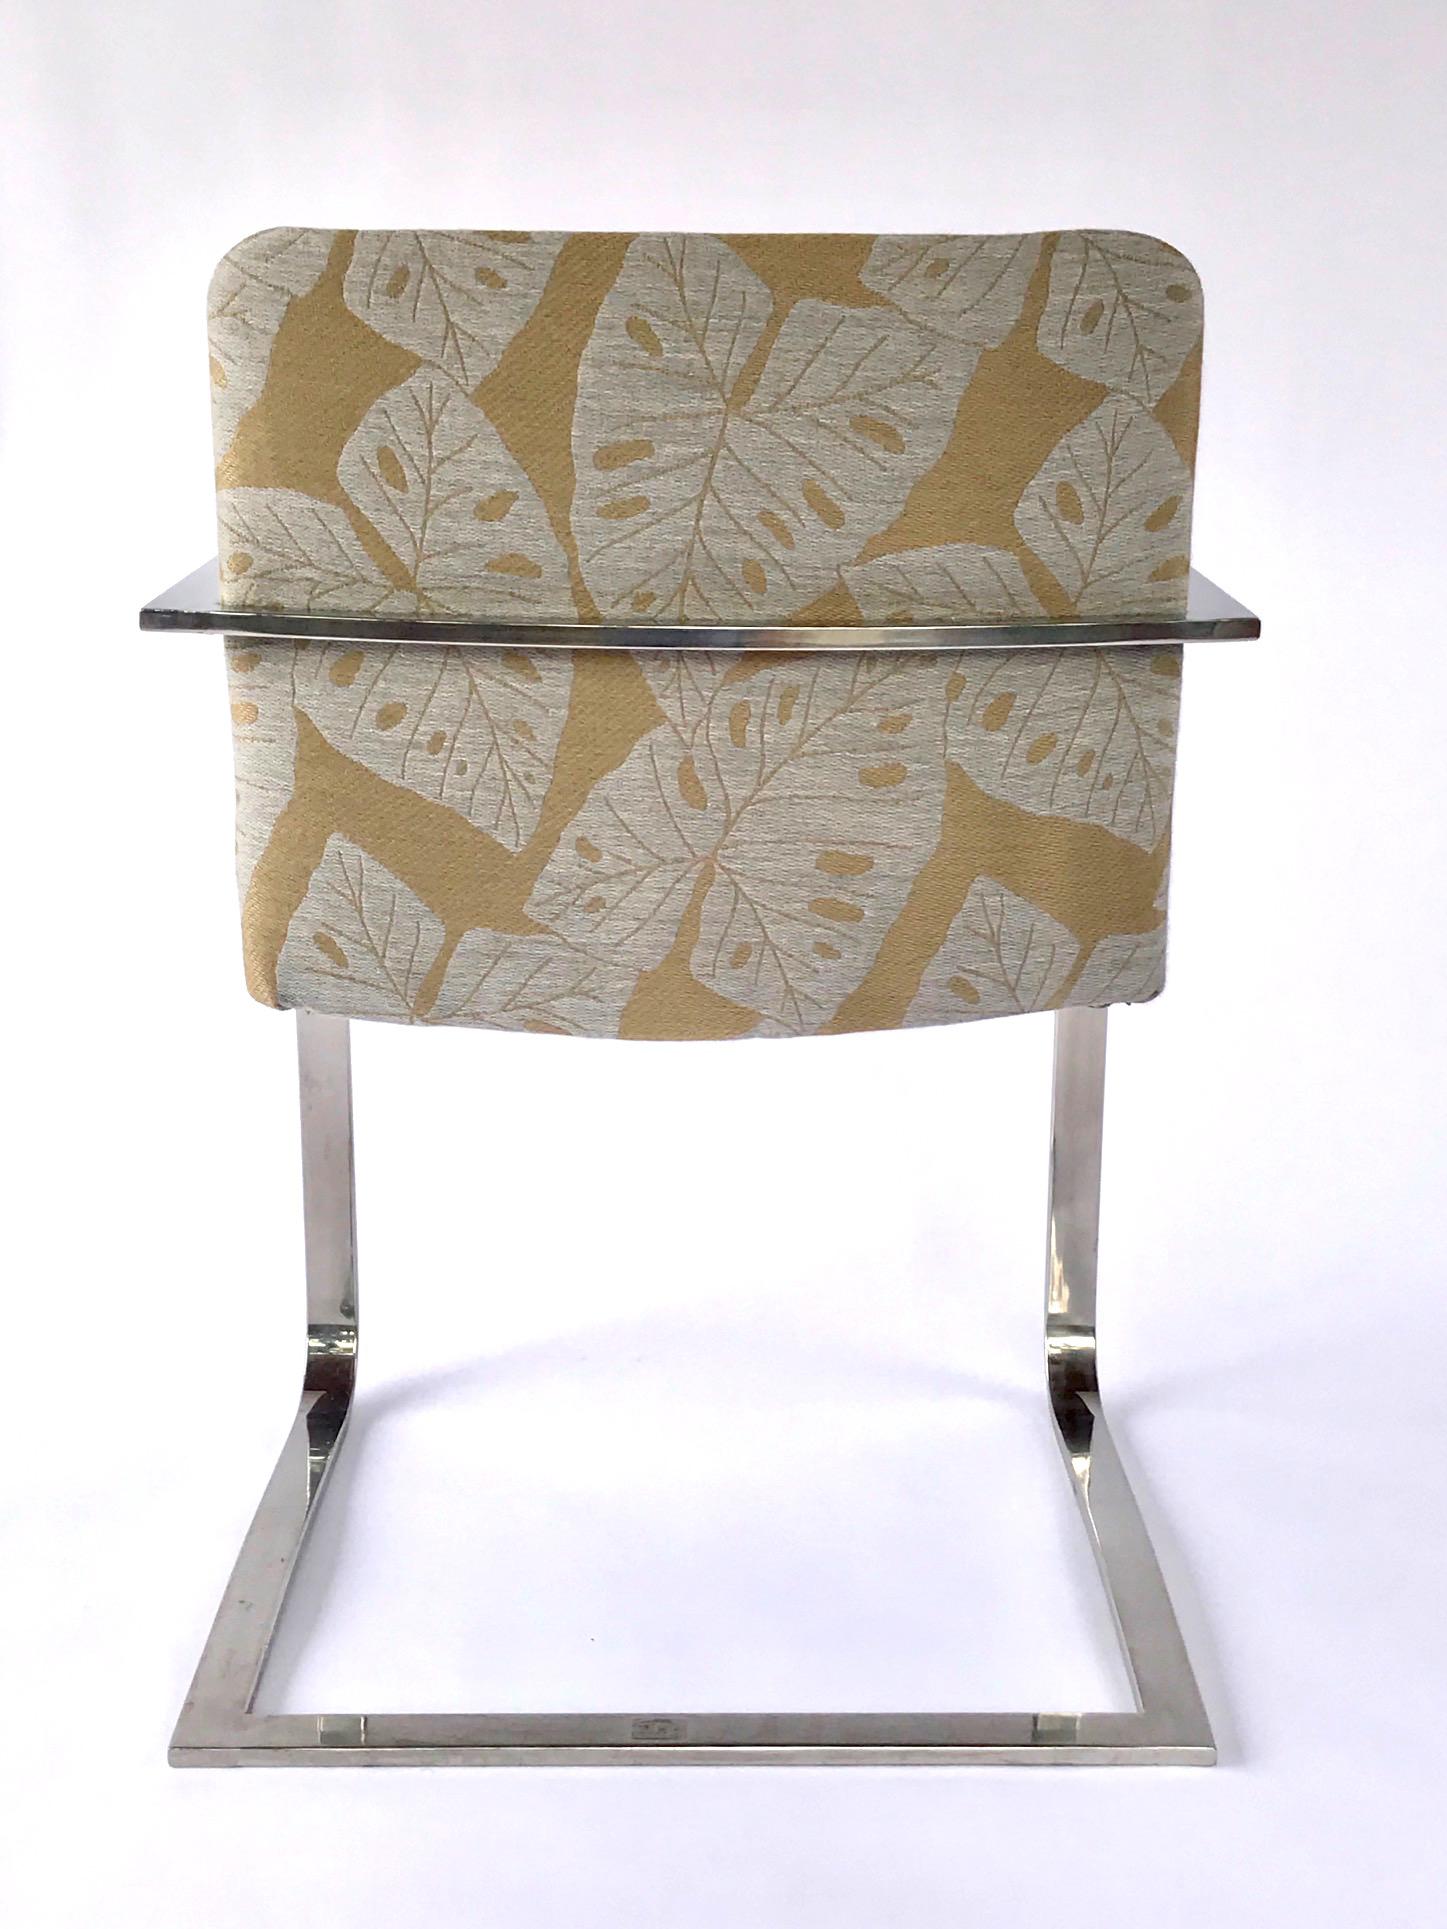 Pair of Mid-Century Modern Chrome Desk Chairs with Tropical Print by Brueton 2